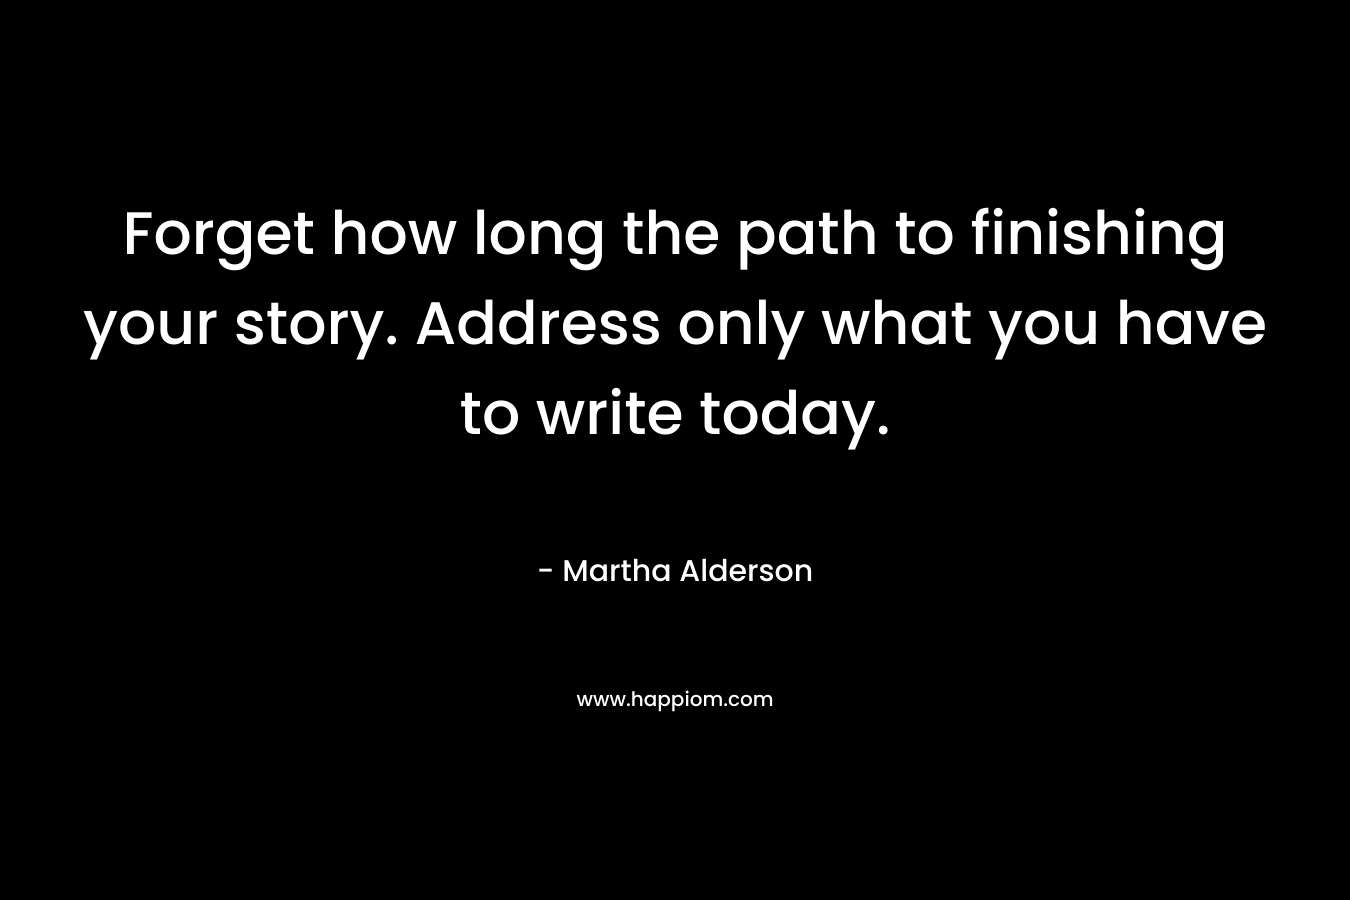 Forget how long the path to finishing your story. Address only what you have to write today. – Martha Alderson